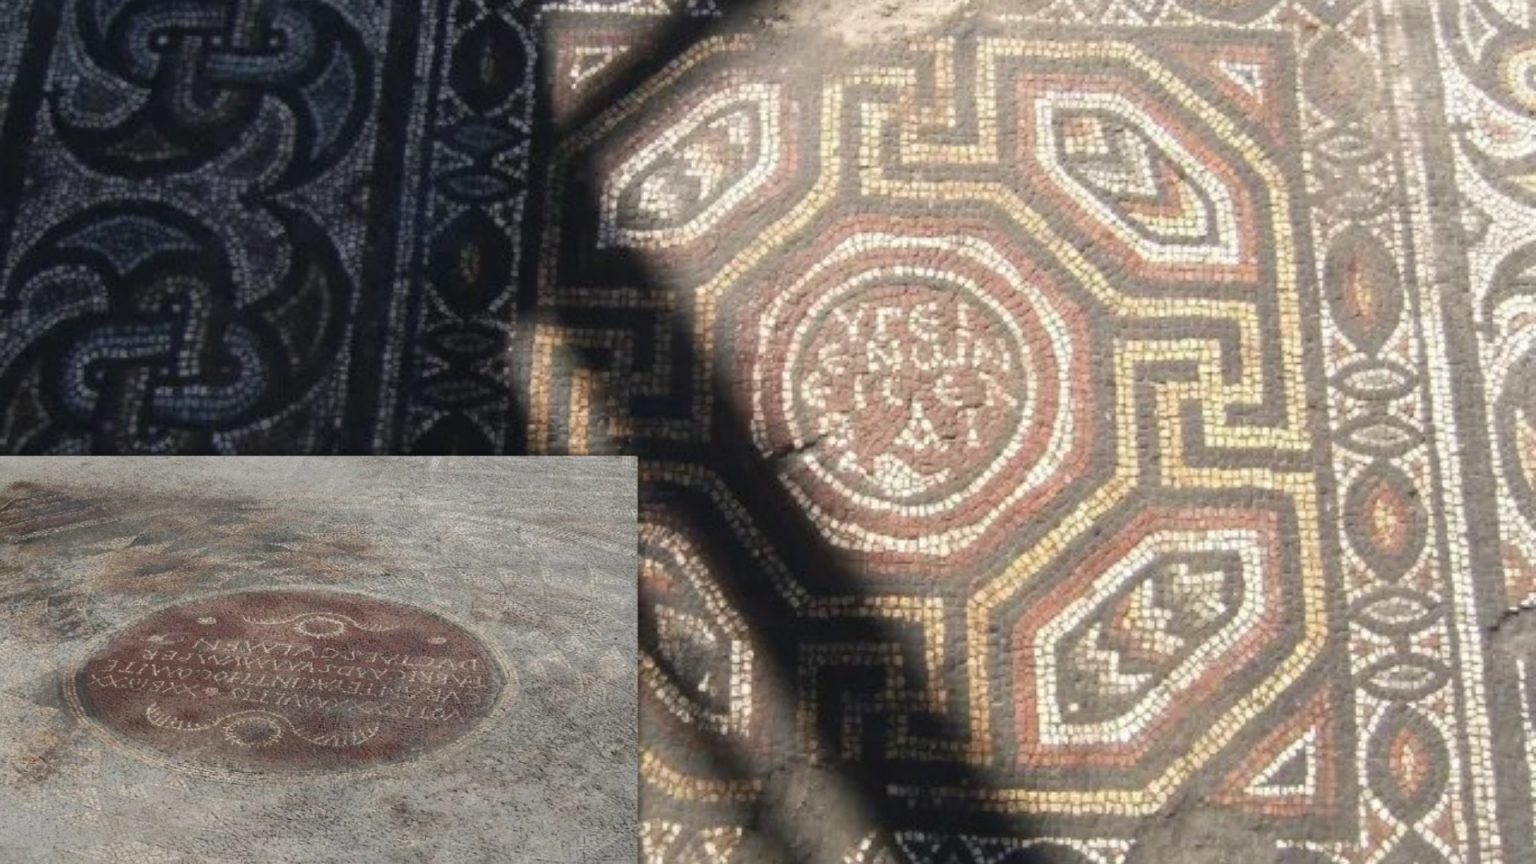 Late Roman-Early Byzantine mosaic floors found in central Turkey